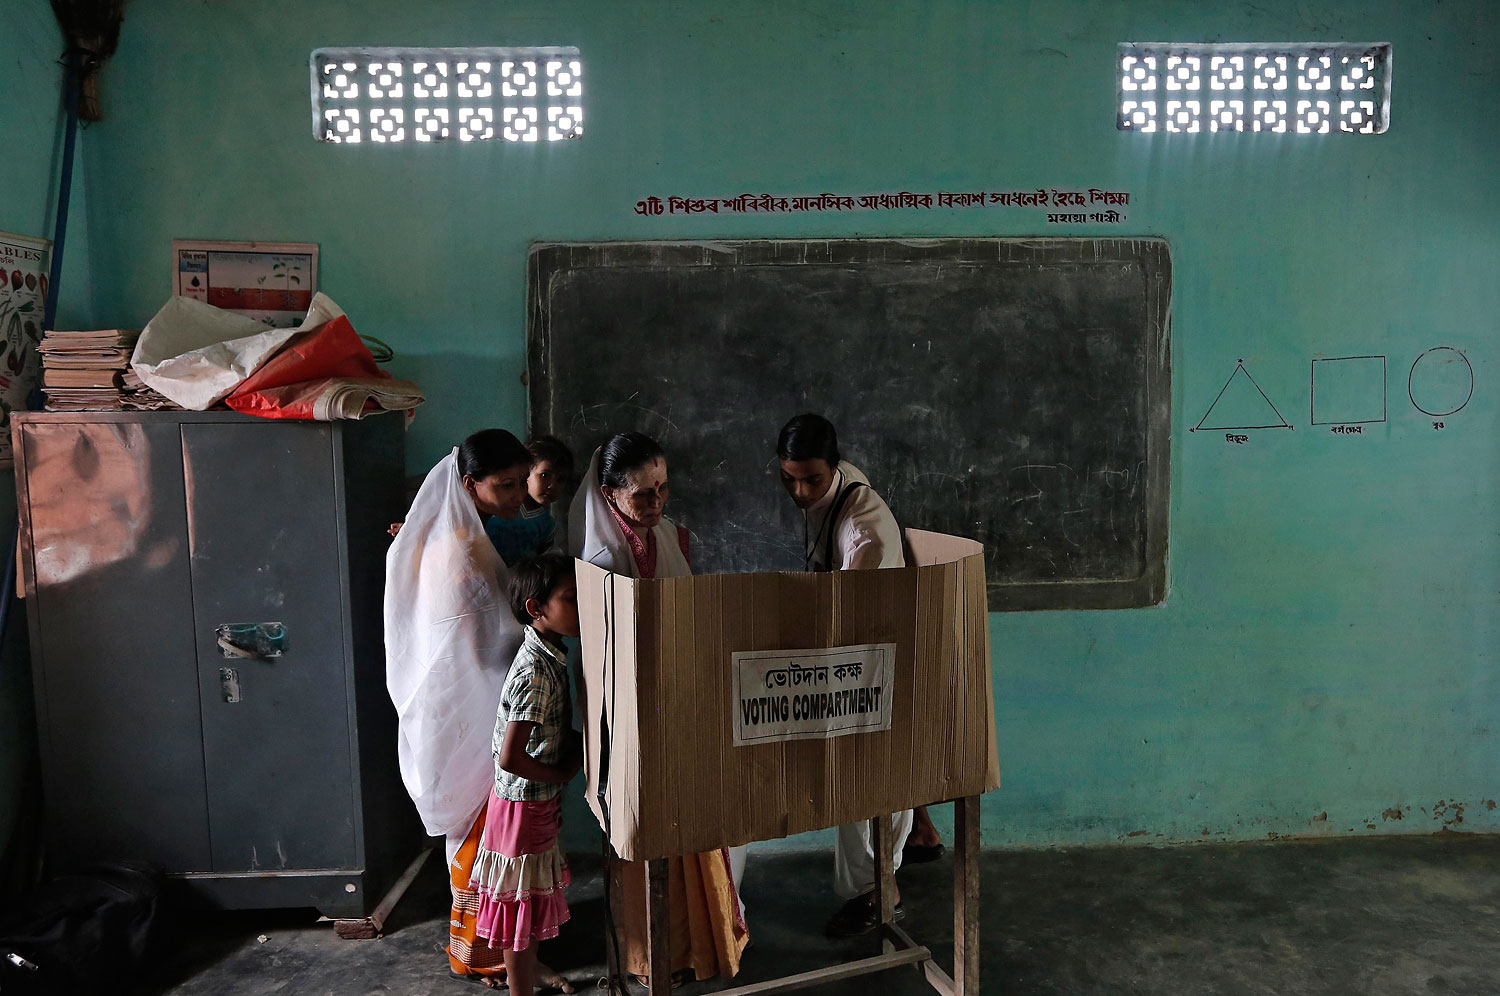 A polling officer helps a woman to cast her vote at a polling station in Majuli, a large river island in the Brahmaputra river, Jorhat district, in the northeastern Indian state of Assam, April 7, 2014.